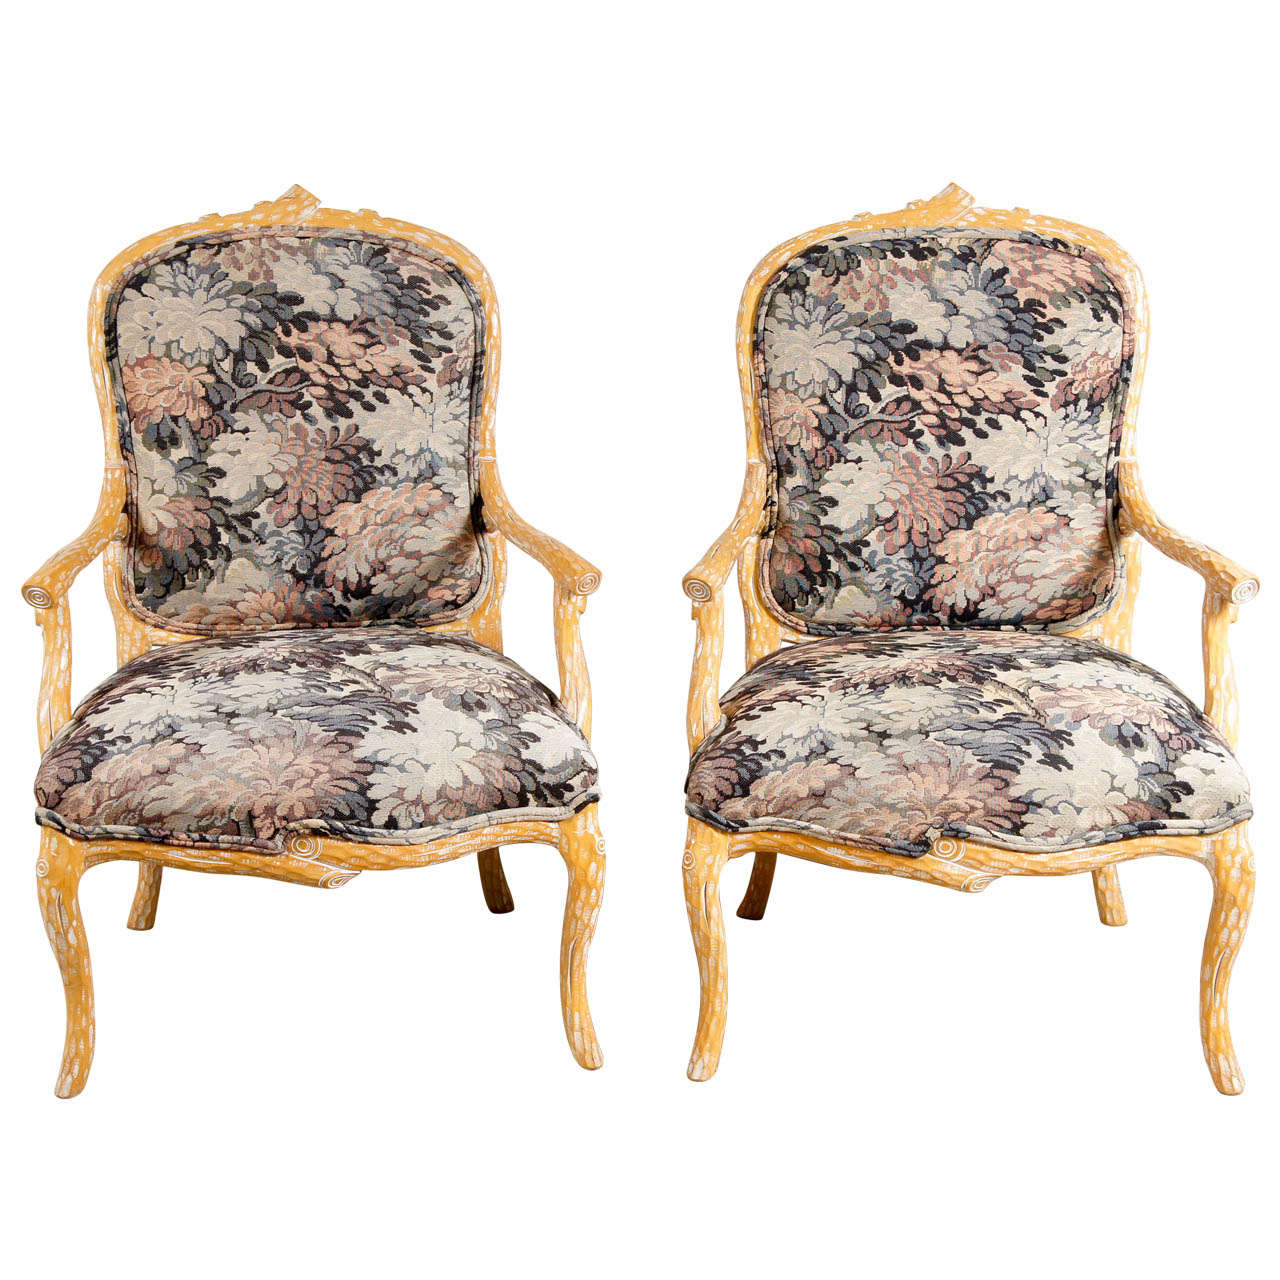 A Pair of Faux Bois Arm Chairs